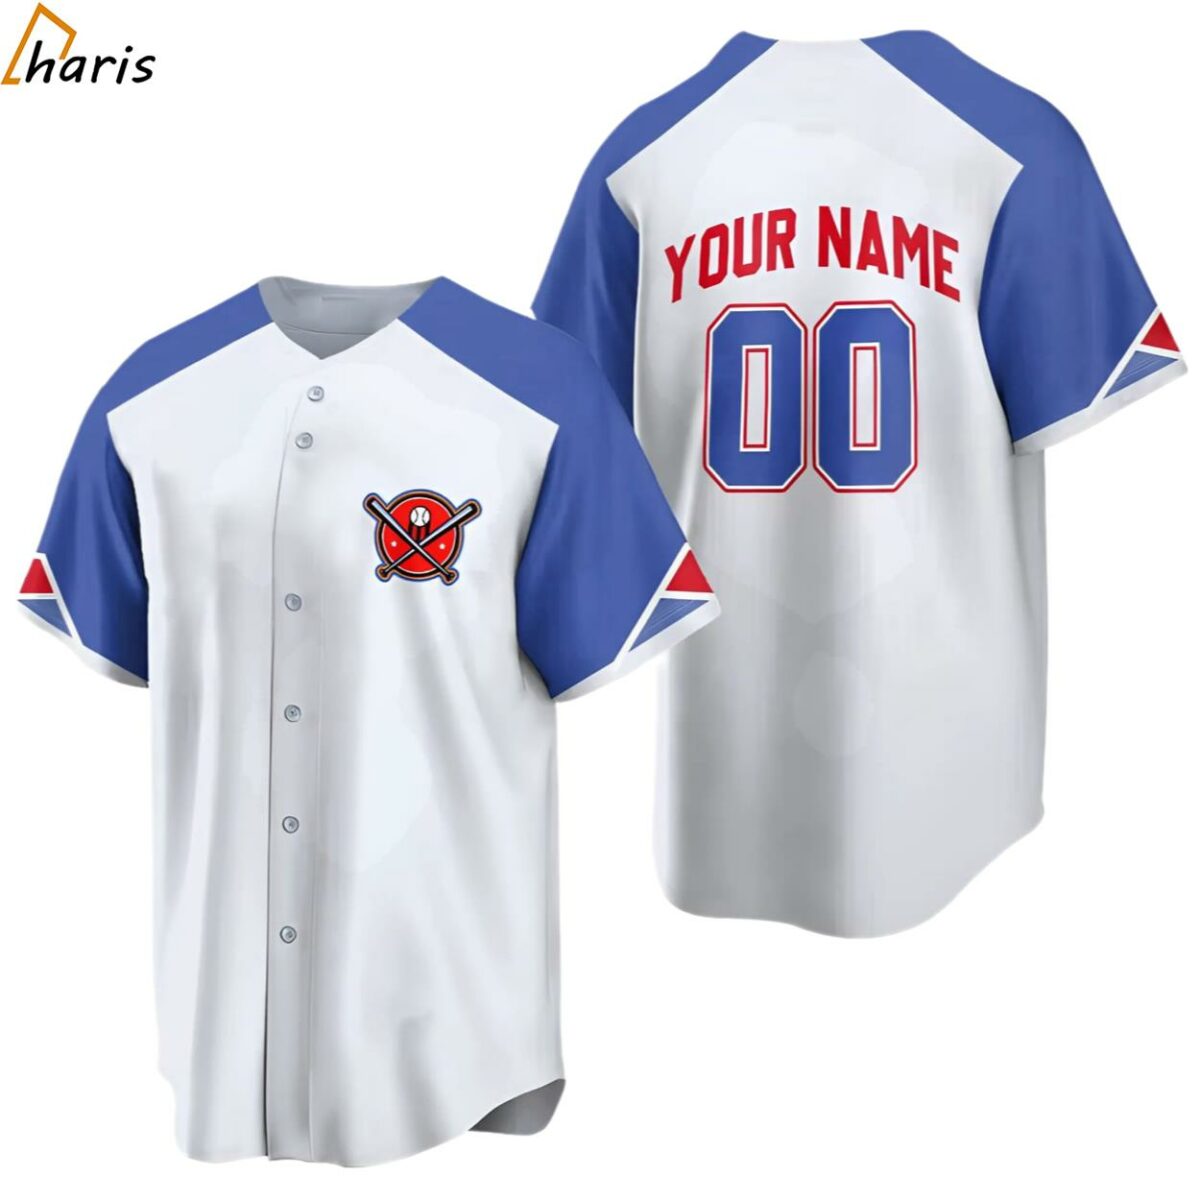 Atlanta White And Blue Customized Name And Number Baseball Jersey jersey jersey